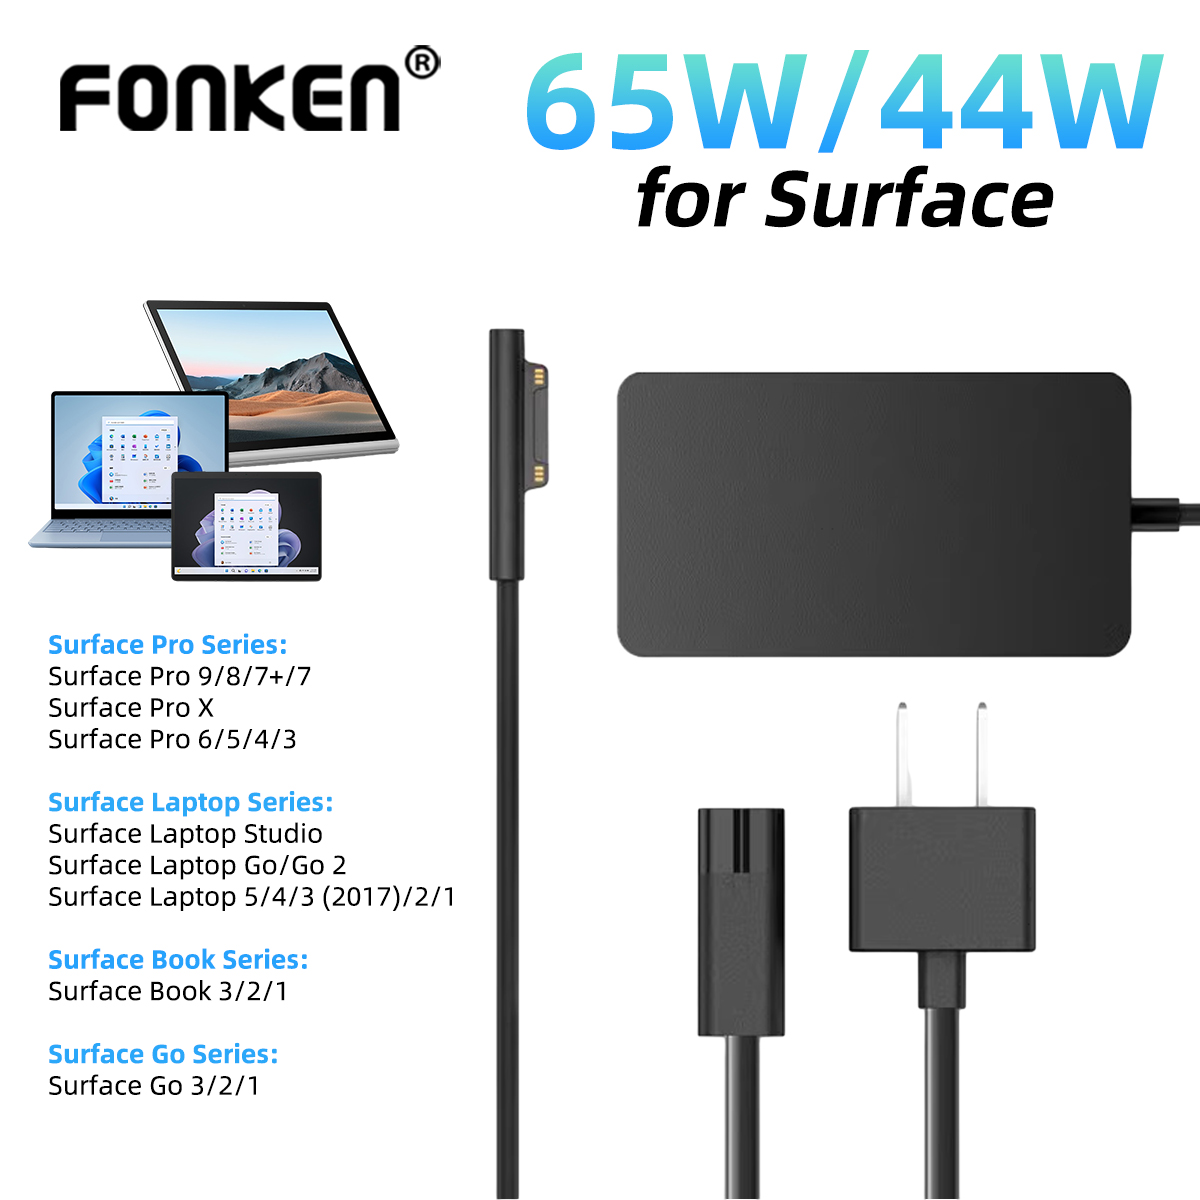 65W Laptop Charger for Microsoft Surface 9, 8, 7+, 7, 6, 5, 4, 3, X,  Windows Surface Laptop 5, 4, 3, 2, 1 Studio, Surface Go Tablet, Surface  Book 3